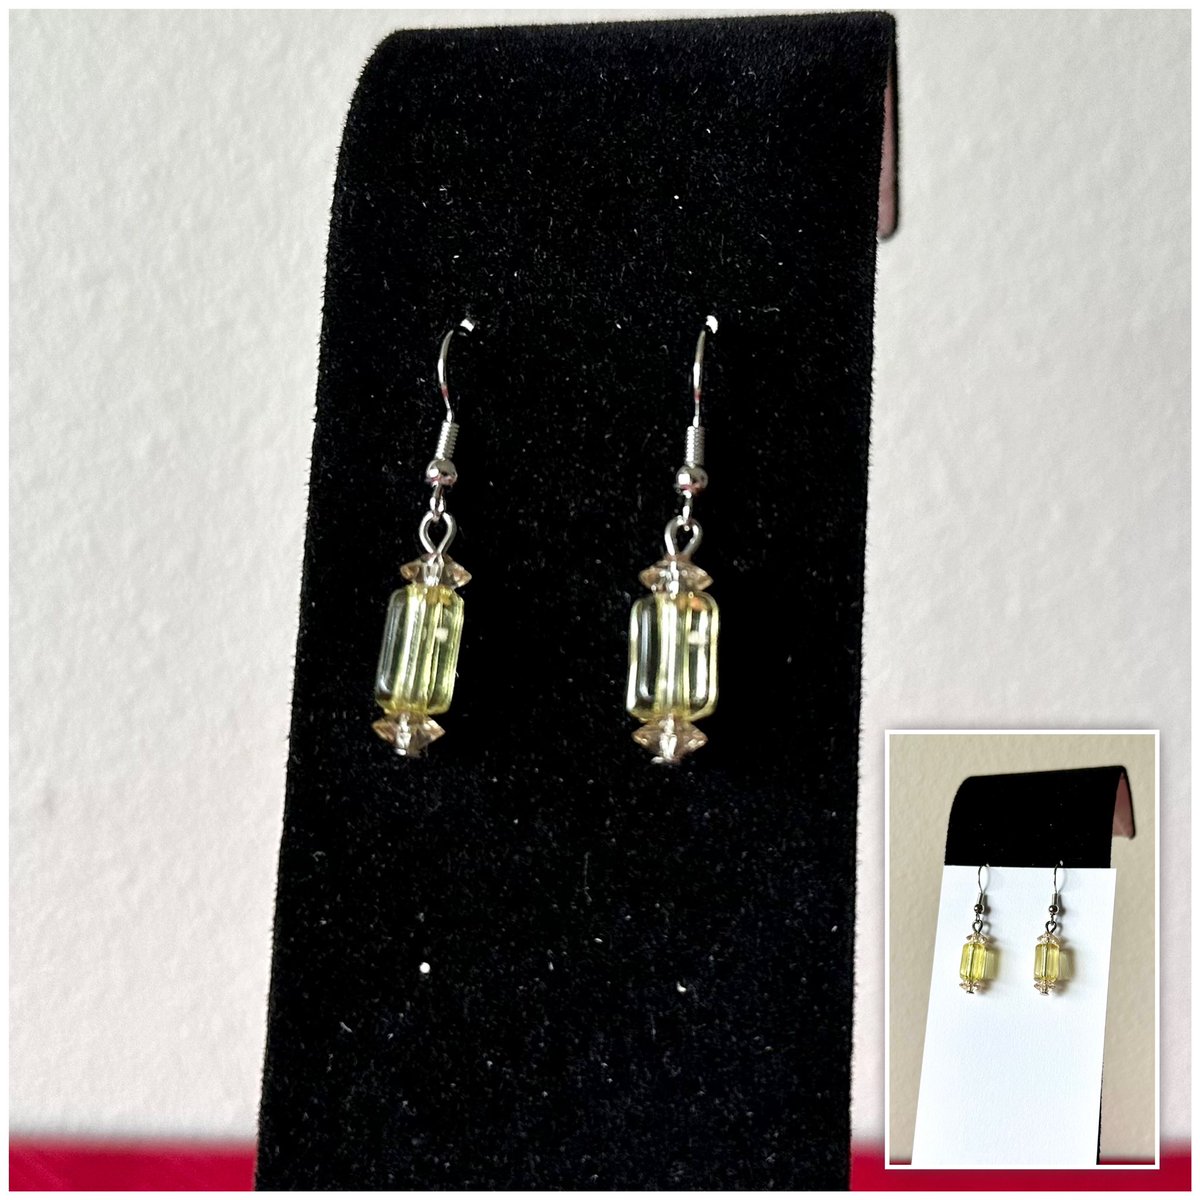 Simple Yellow Earrings
(Lighting can affect how these earrings look)

Available in my Square shop:
justaskcassie.square.site/product/simple…

#simpleearrings #yellowearrings #yellow #earringsoftheday #jewelry #simplejewelry #yellowjewelry #simplejewelry #uniquejewelry #uniquegifts #uniqueearrings